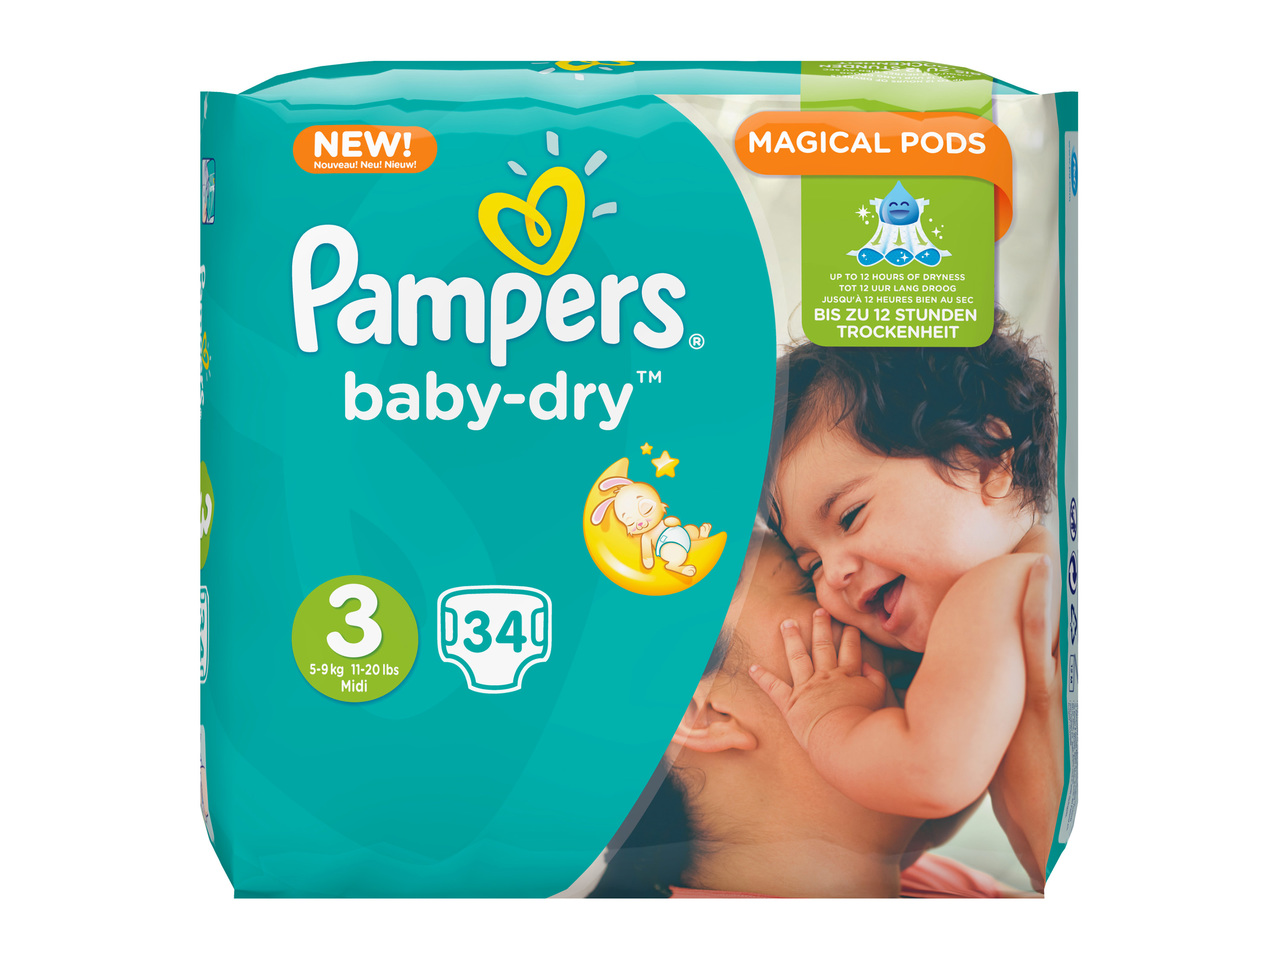 Pampers couches baby-dry